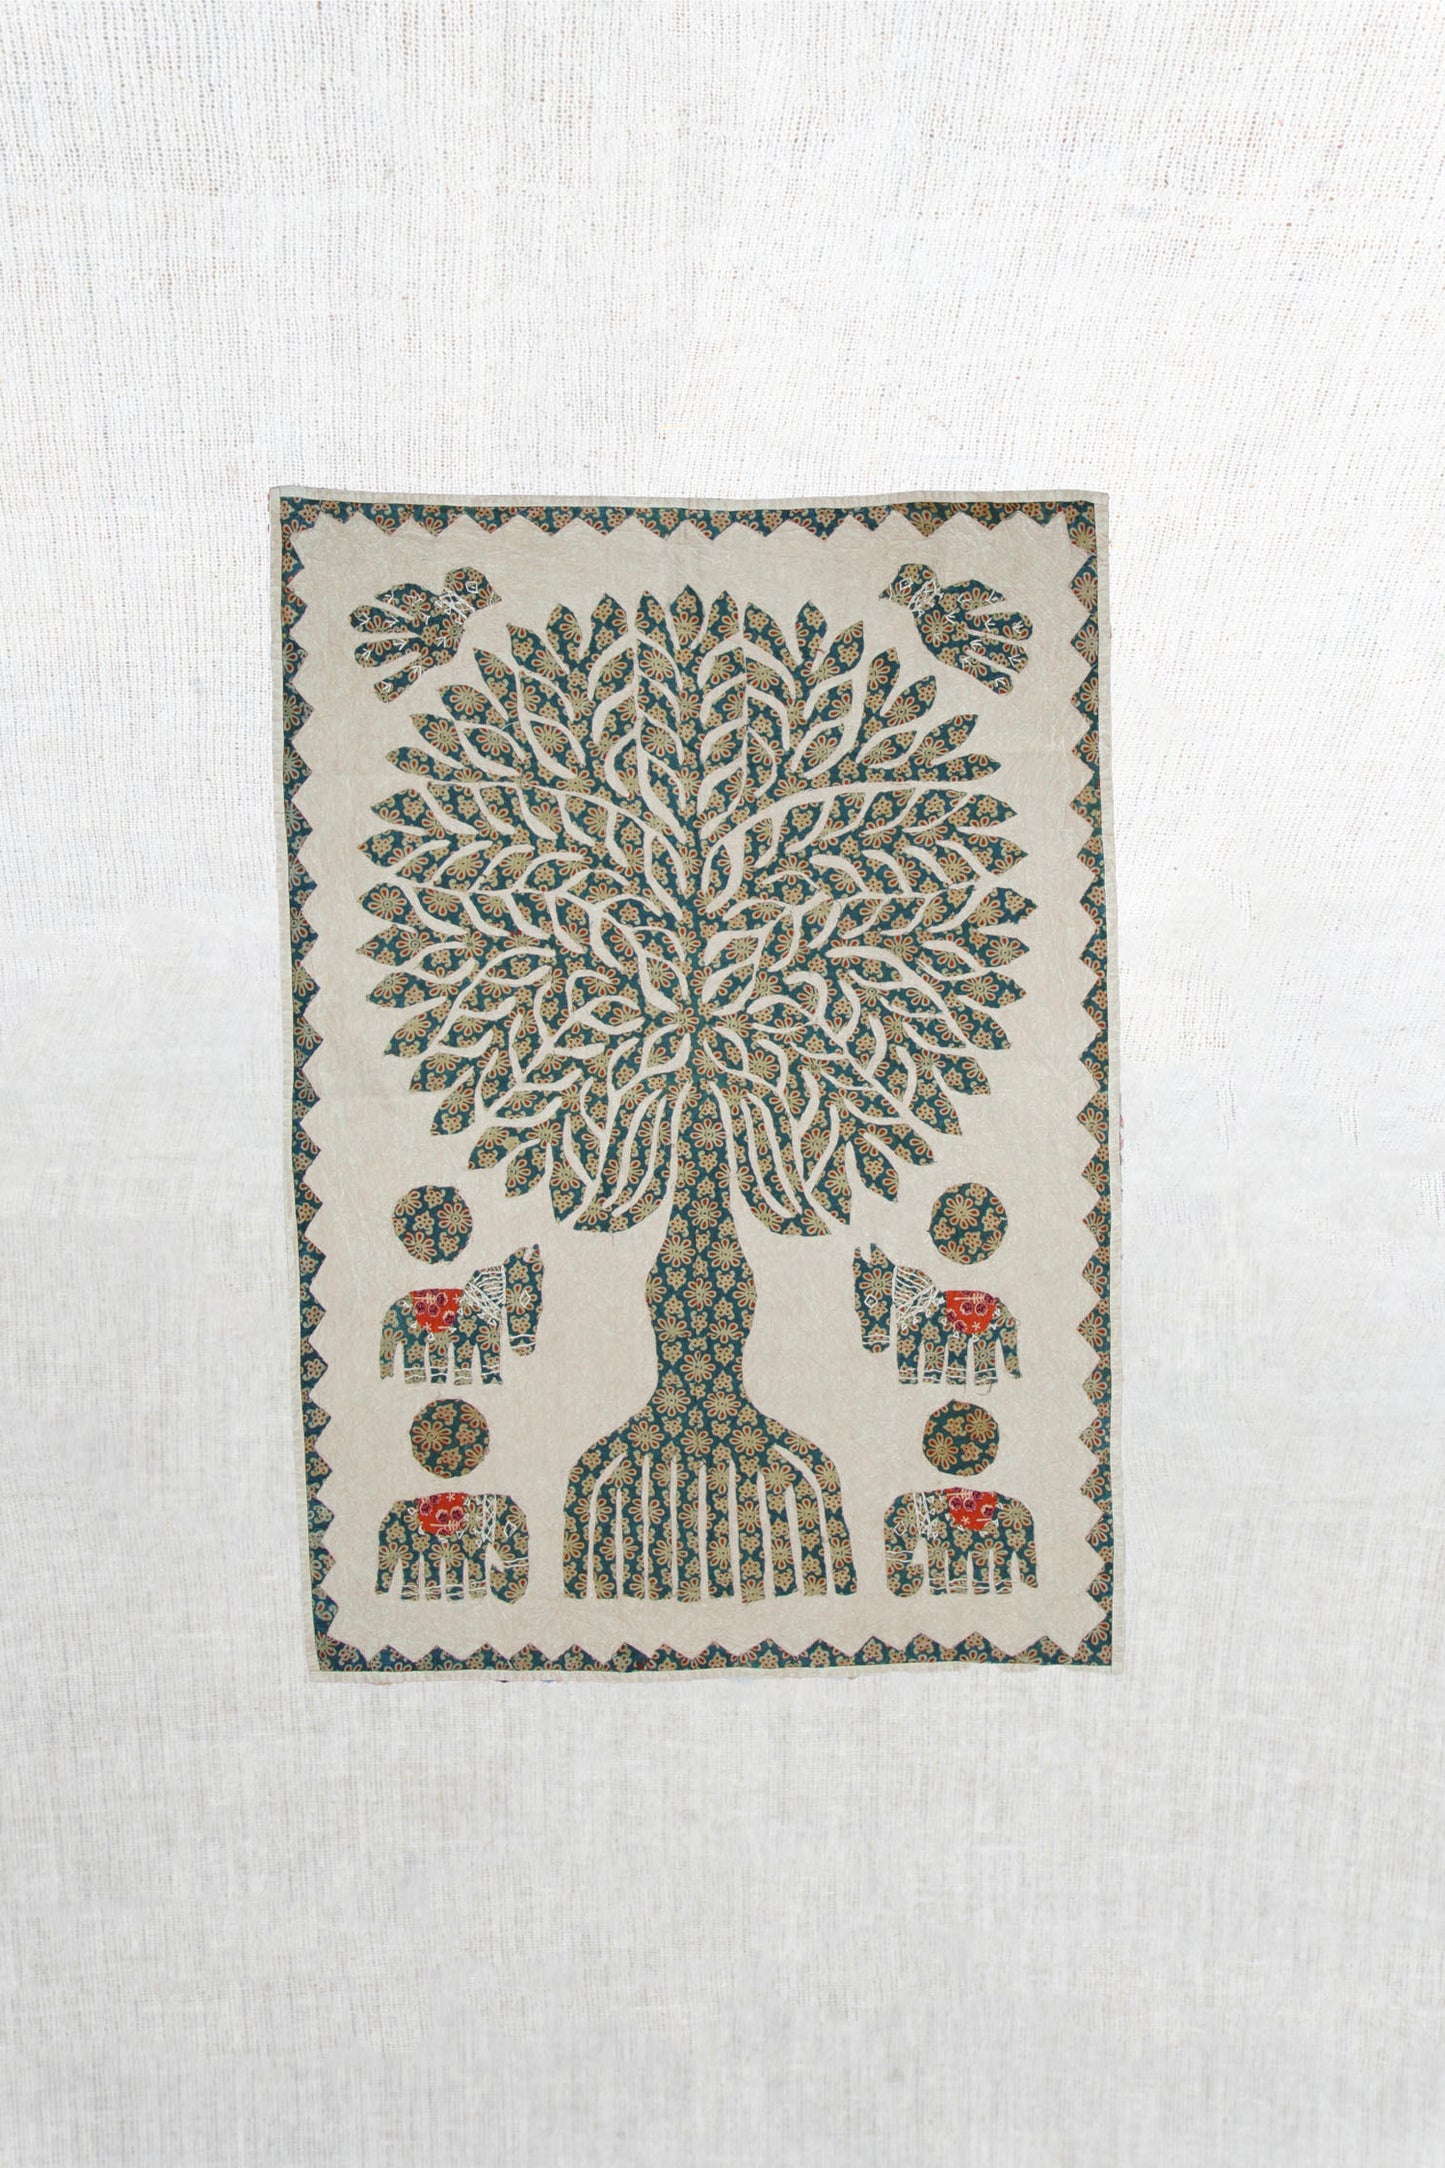 Olive Vineyard Tree of Life Hand-Embroidered Tapestry Small